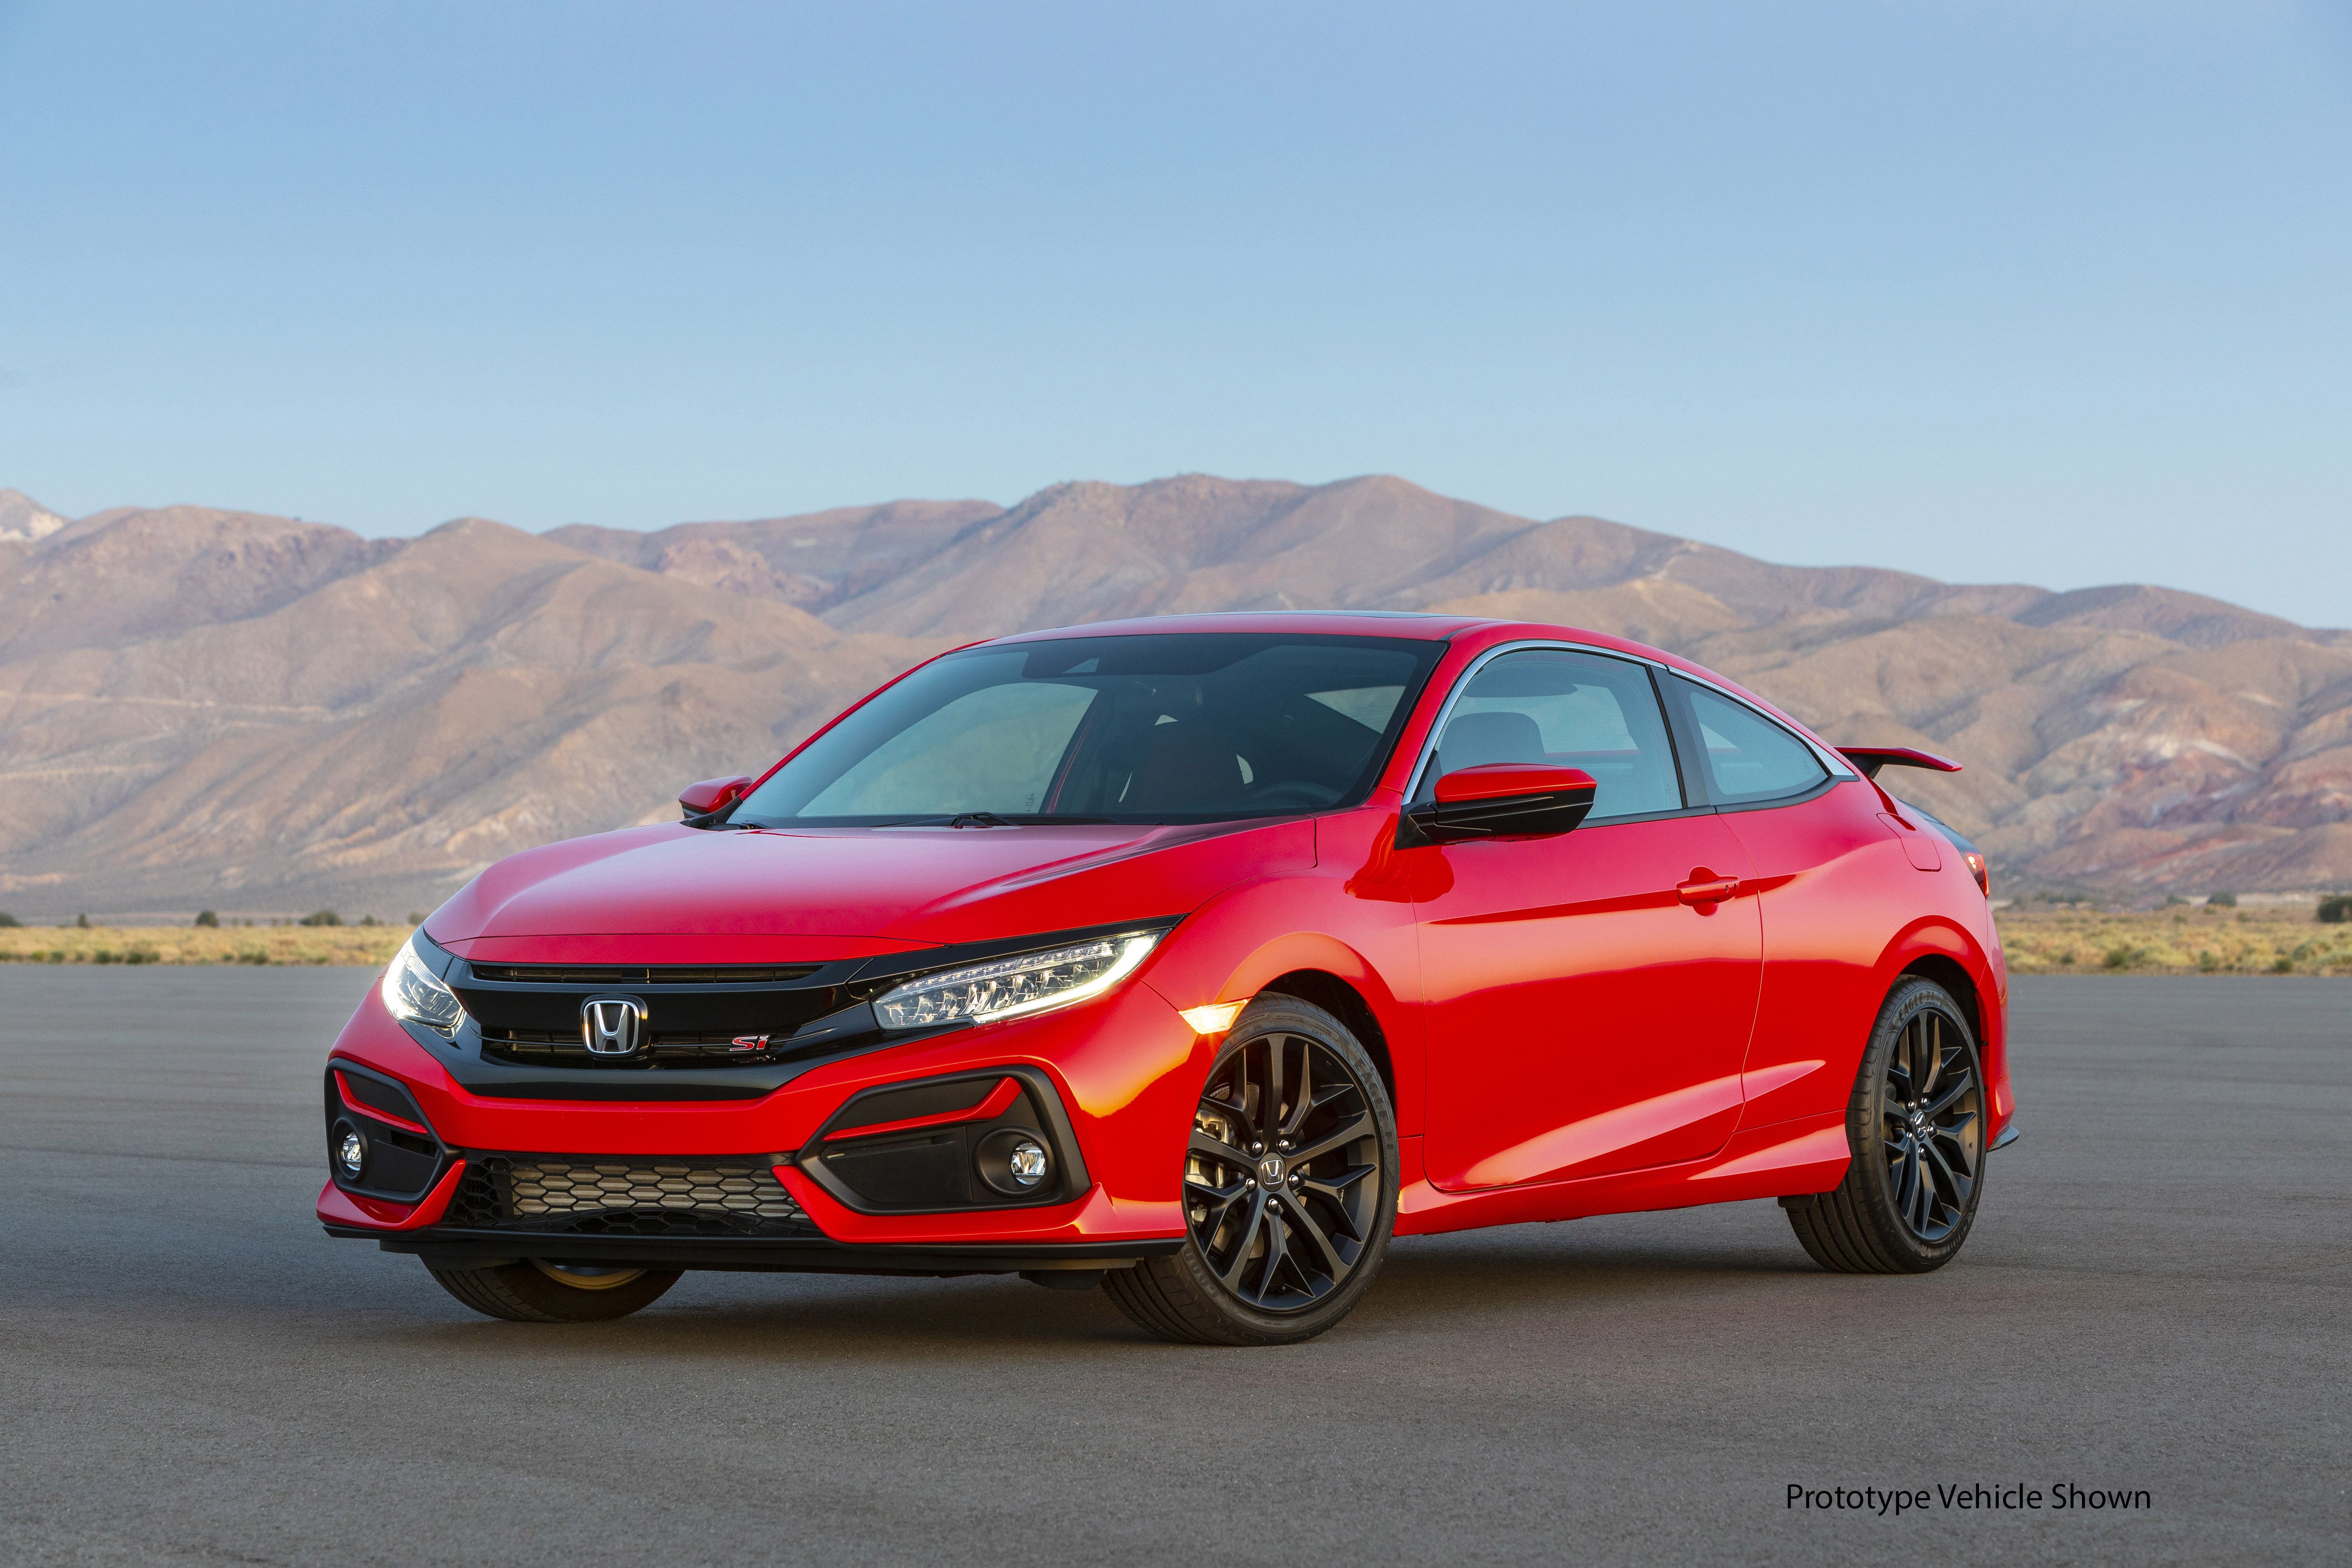 2020 Honda Civic Si Updated with New Features, Tweaked Styling